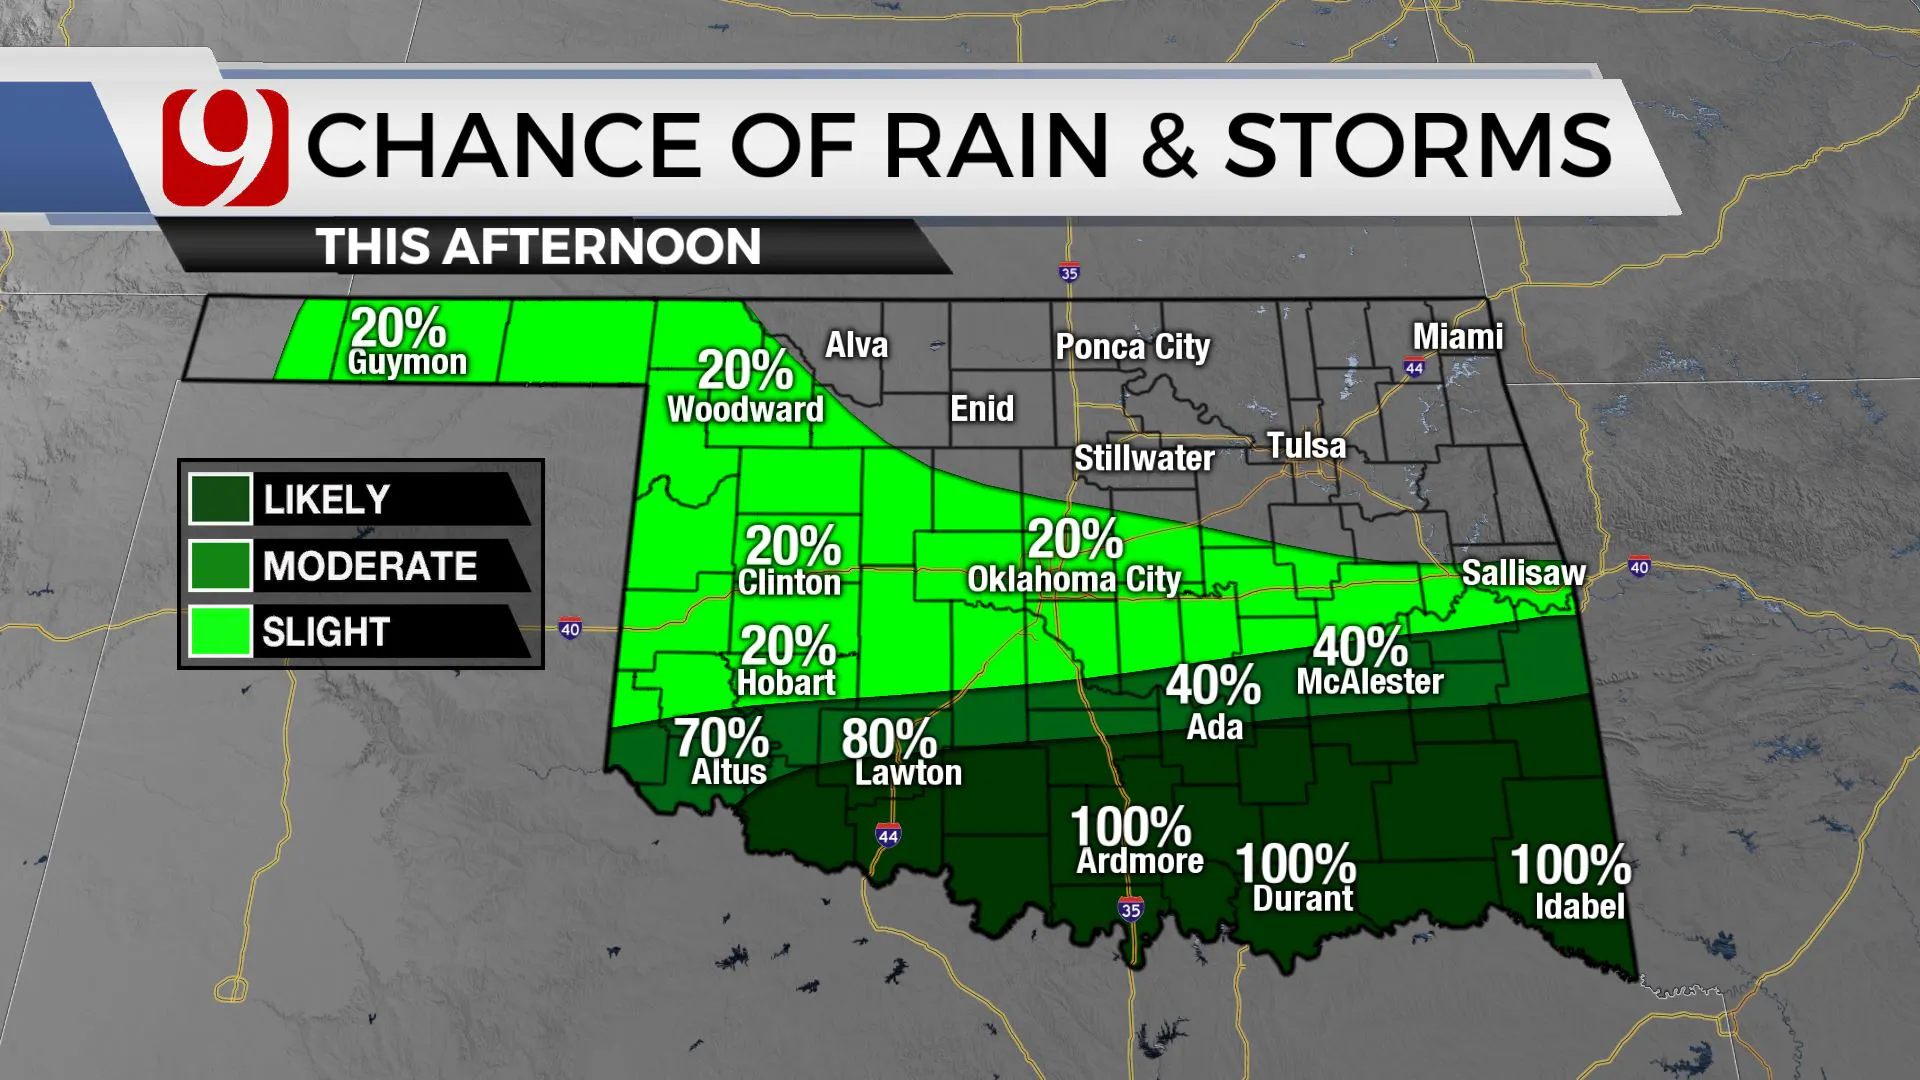 Chances of rain and storms Friday afternoon.